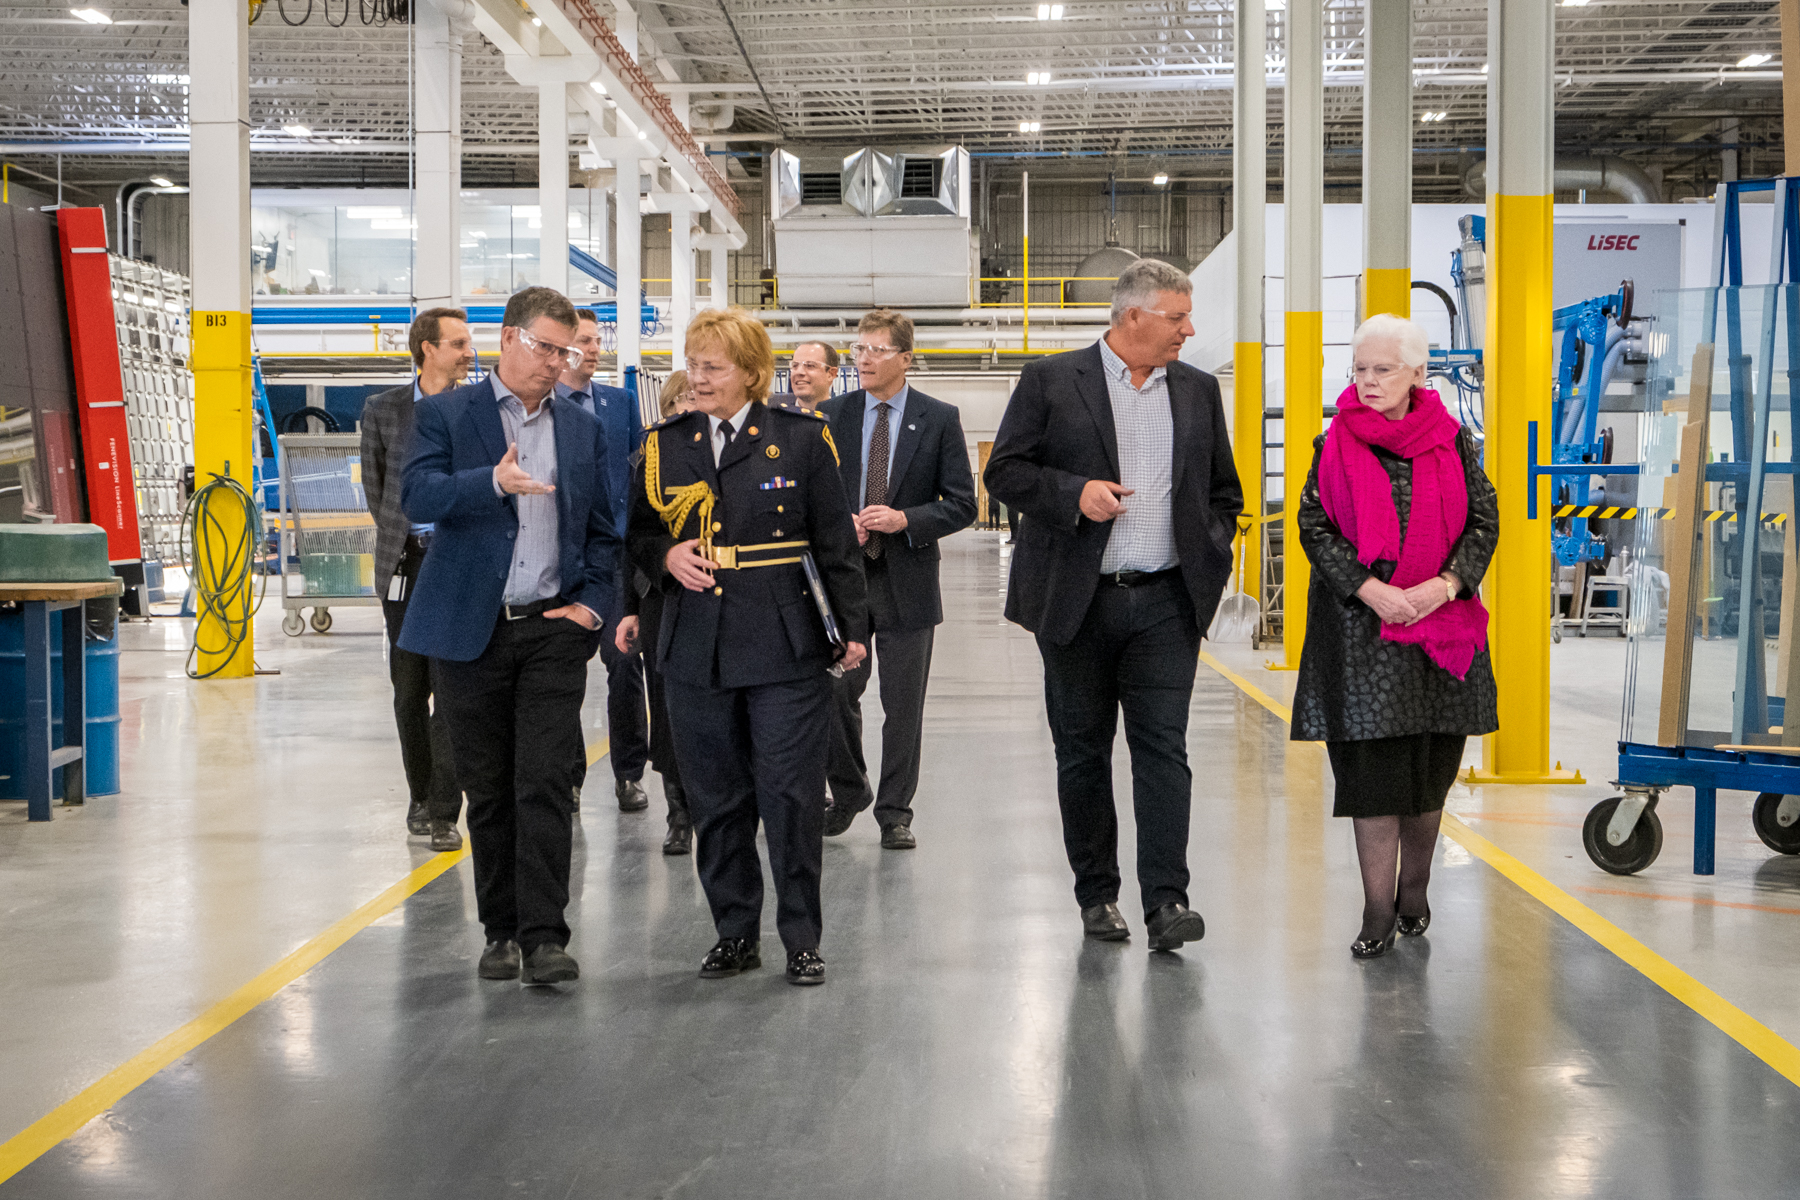 The plant tour with the Honourable Elizabeth Dowdeswell, Richard Wilson and Jeff Wilkins